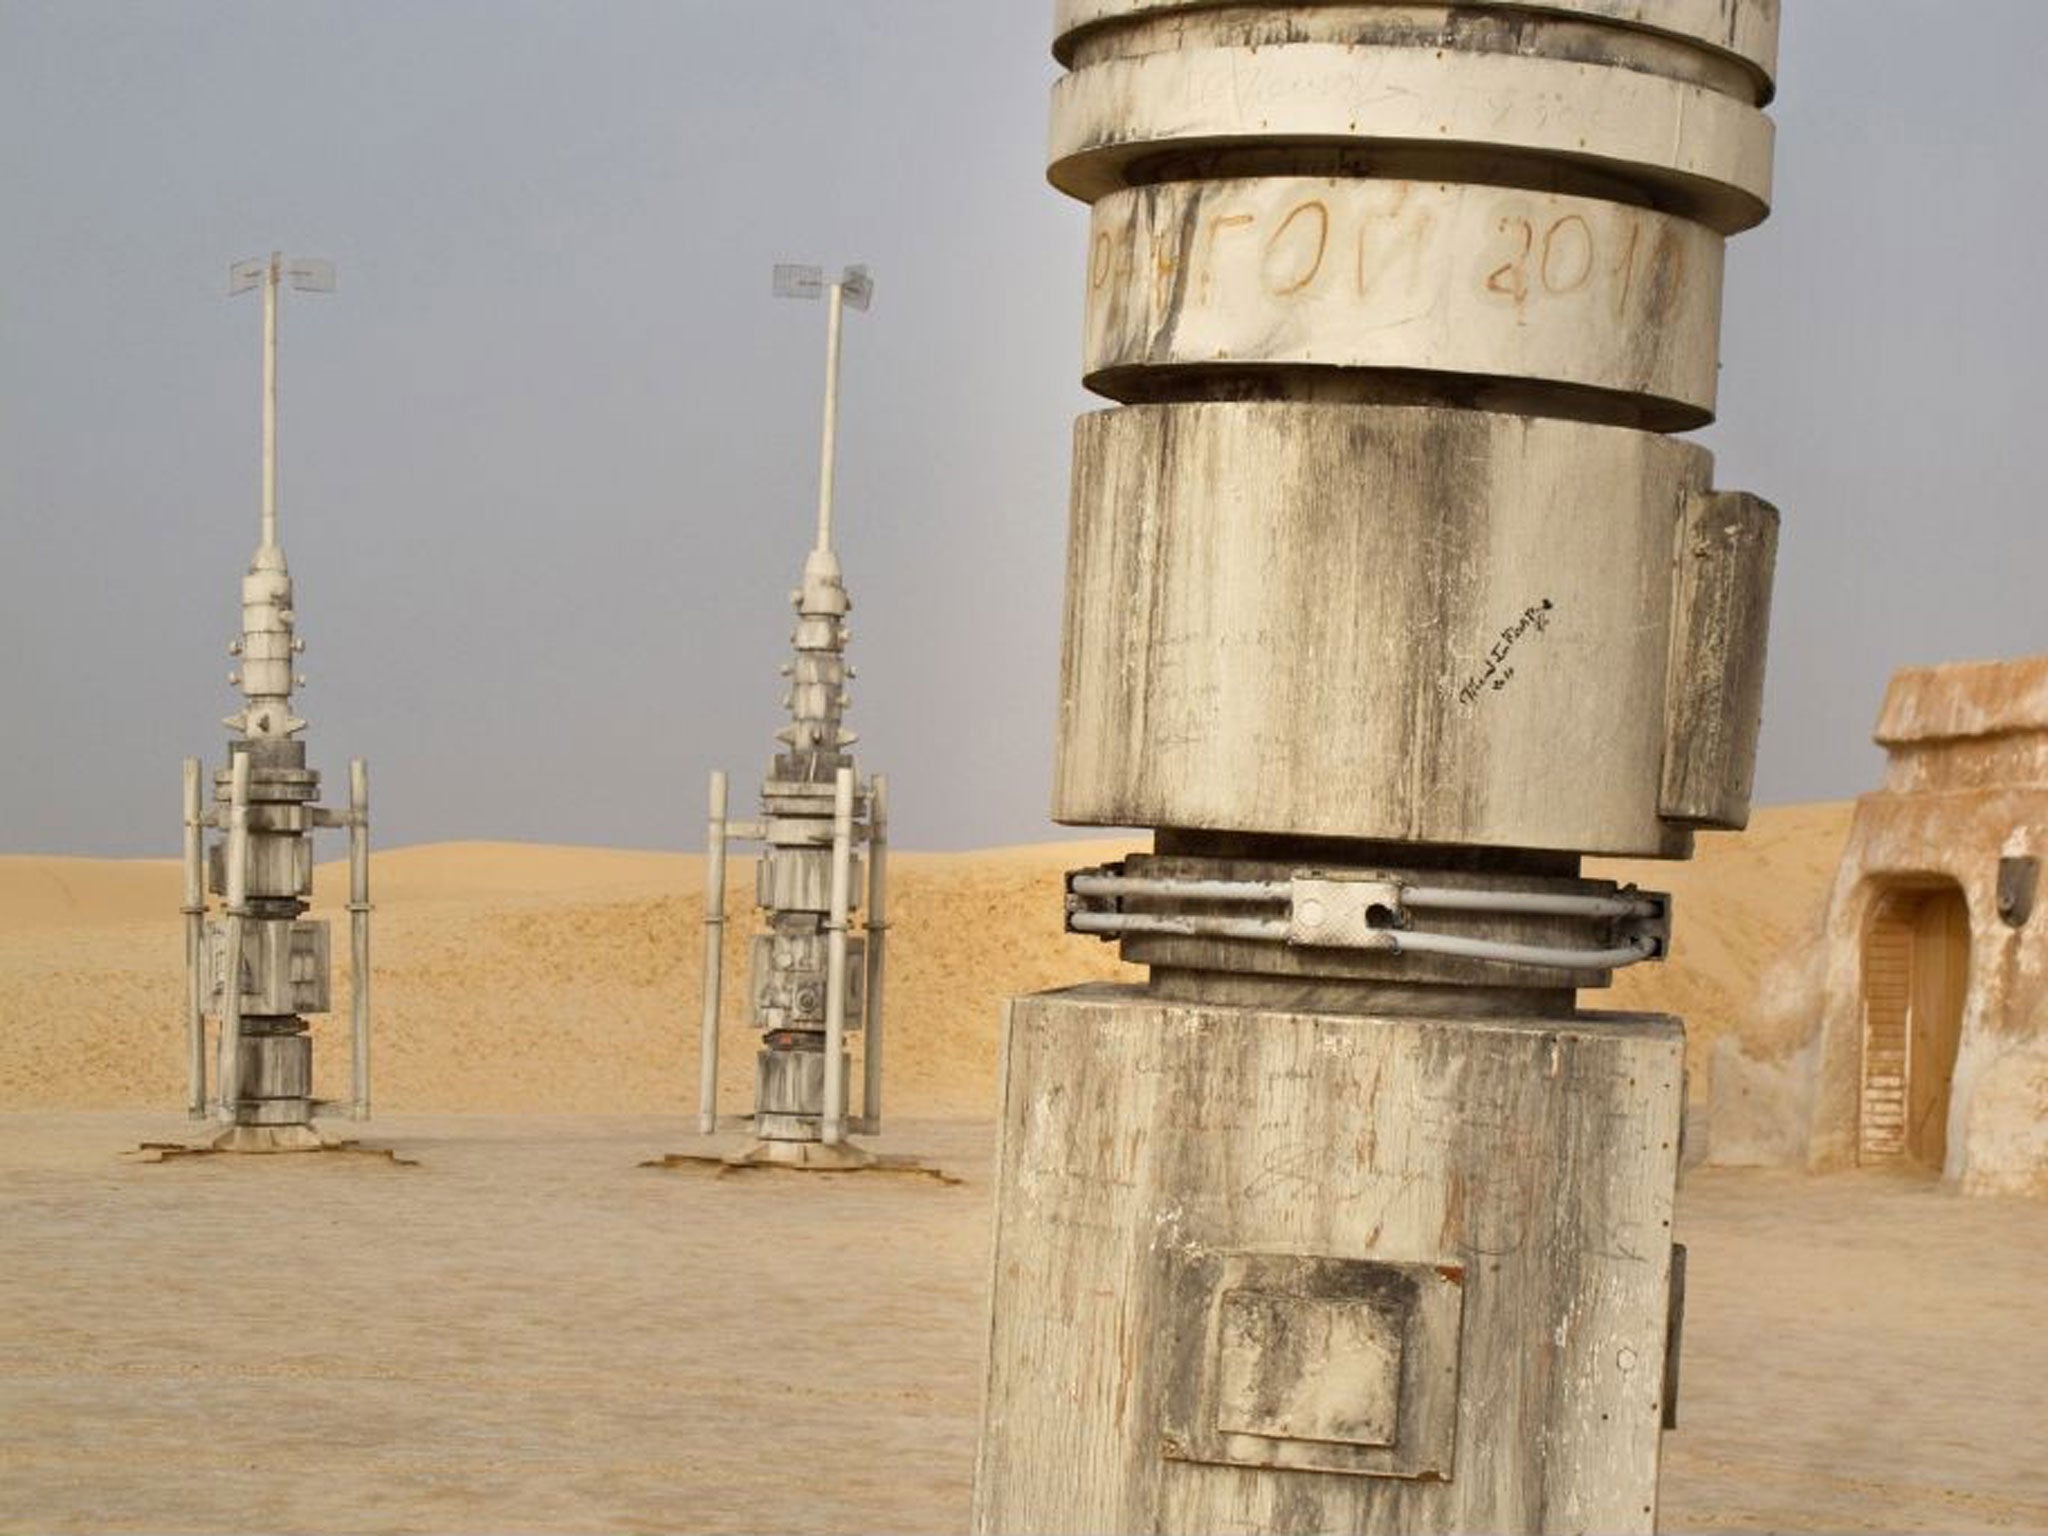 Bits of the Star Wars set were left on location and have long since gathered sand